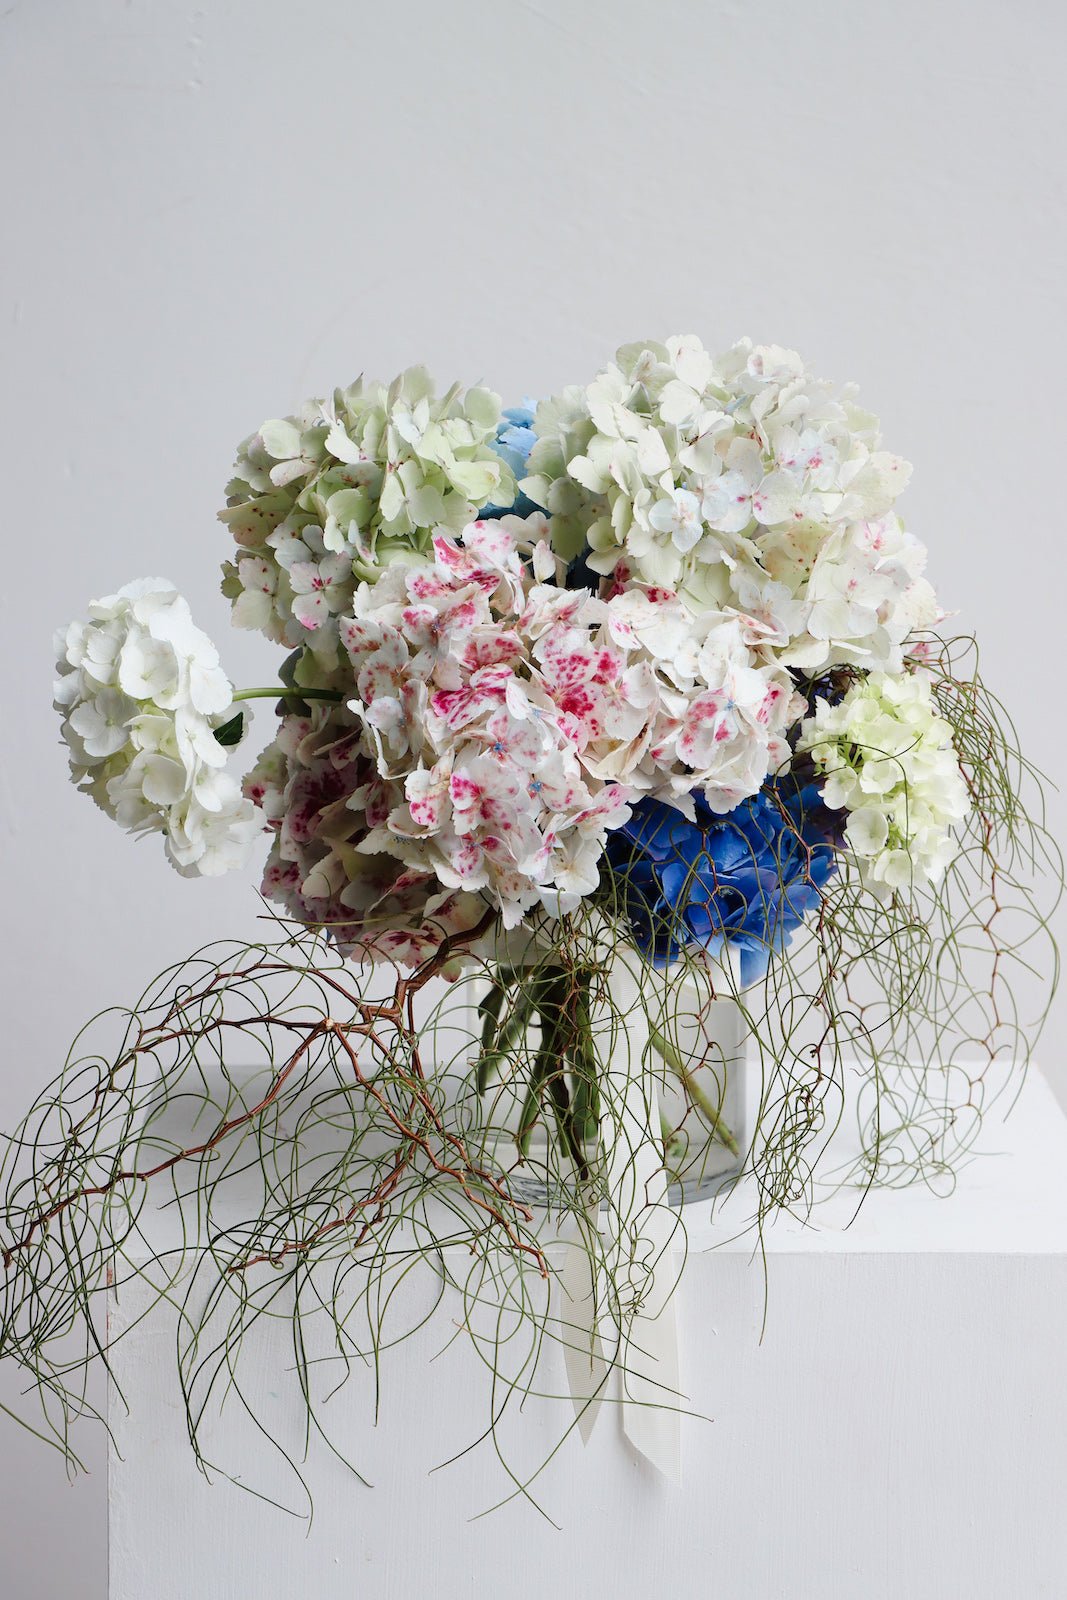 A vase arrangement of Blue, white and pink Hydrangea flowers with trailing acacia foliage. 